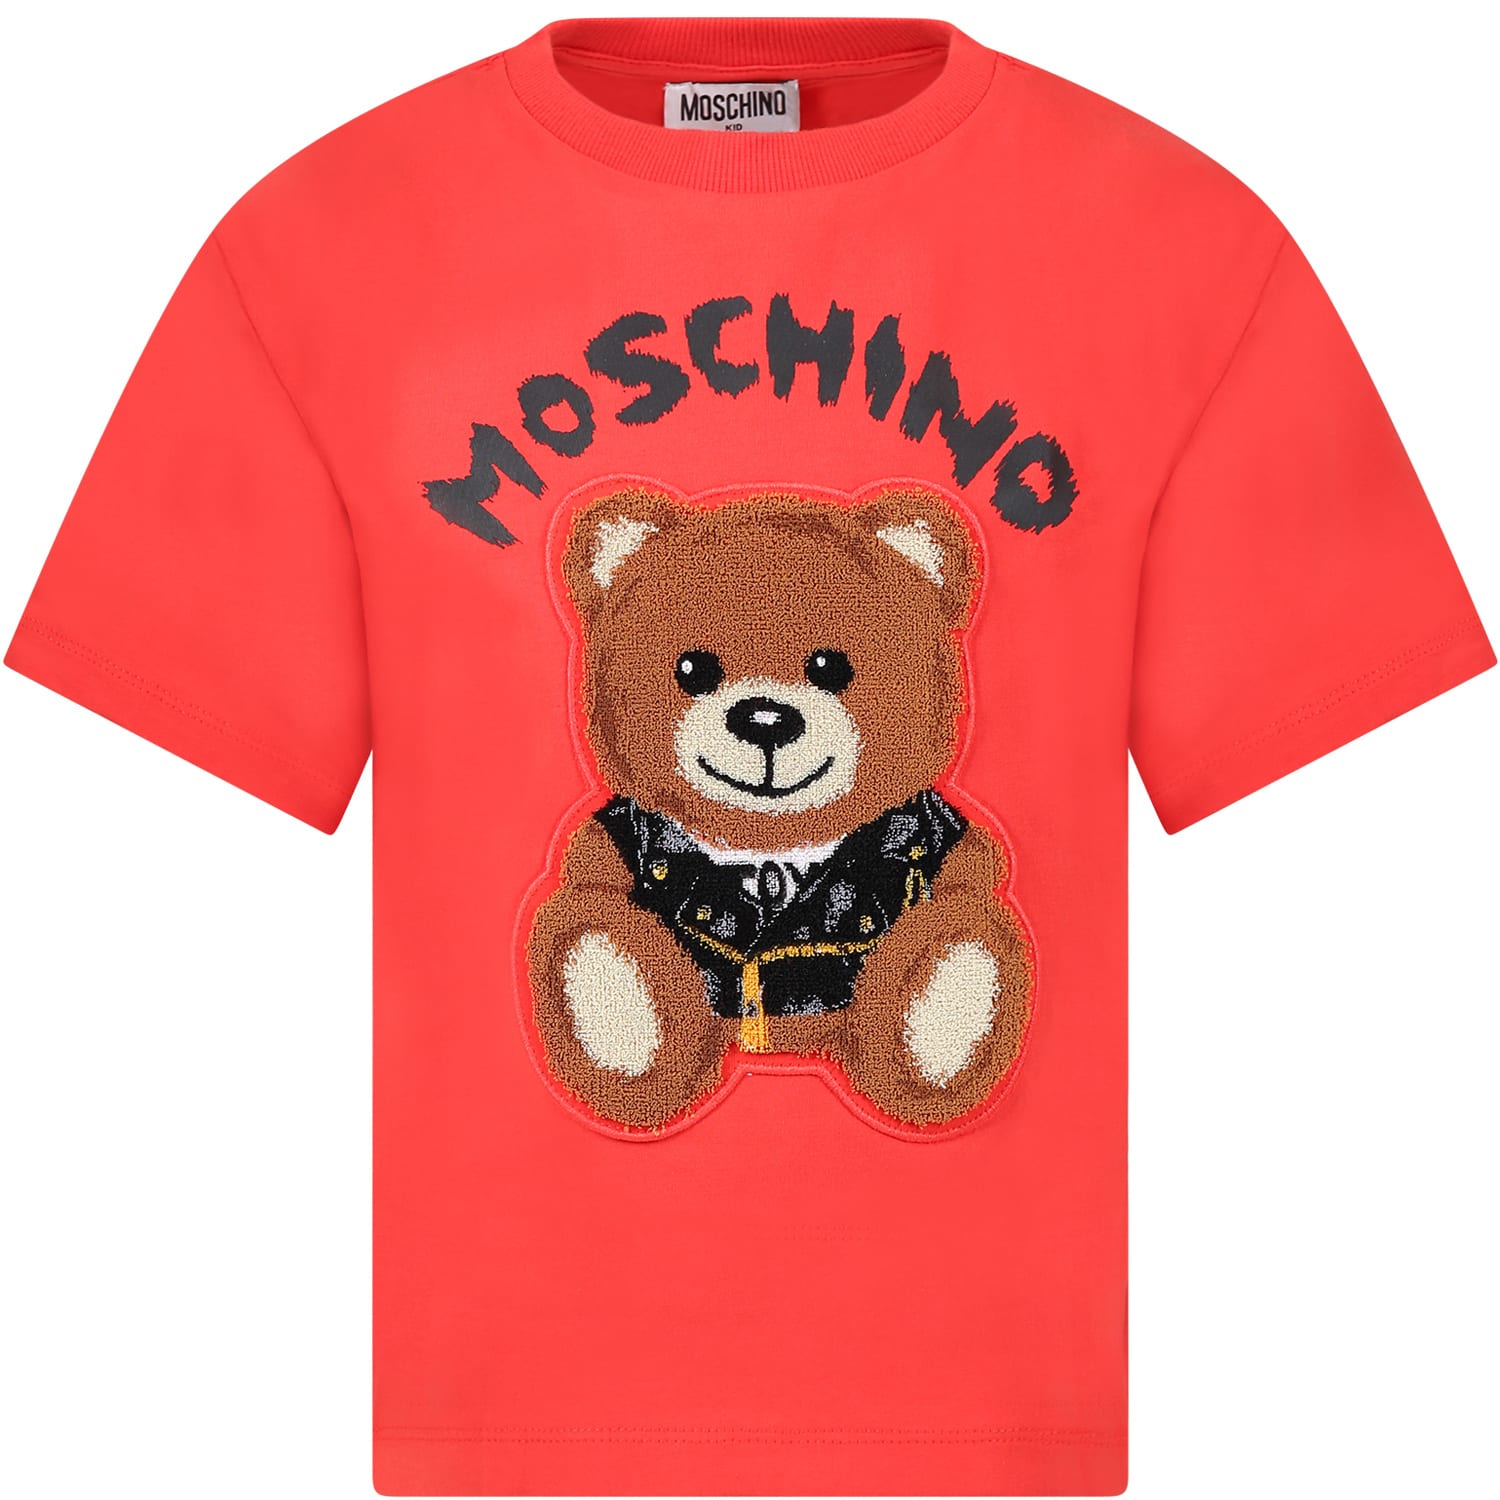 Moschino Red T-shirt For Kids With Logo And Teddy Bear